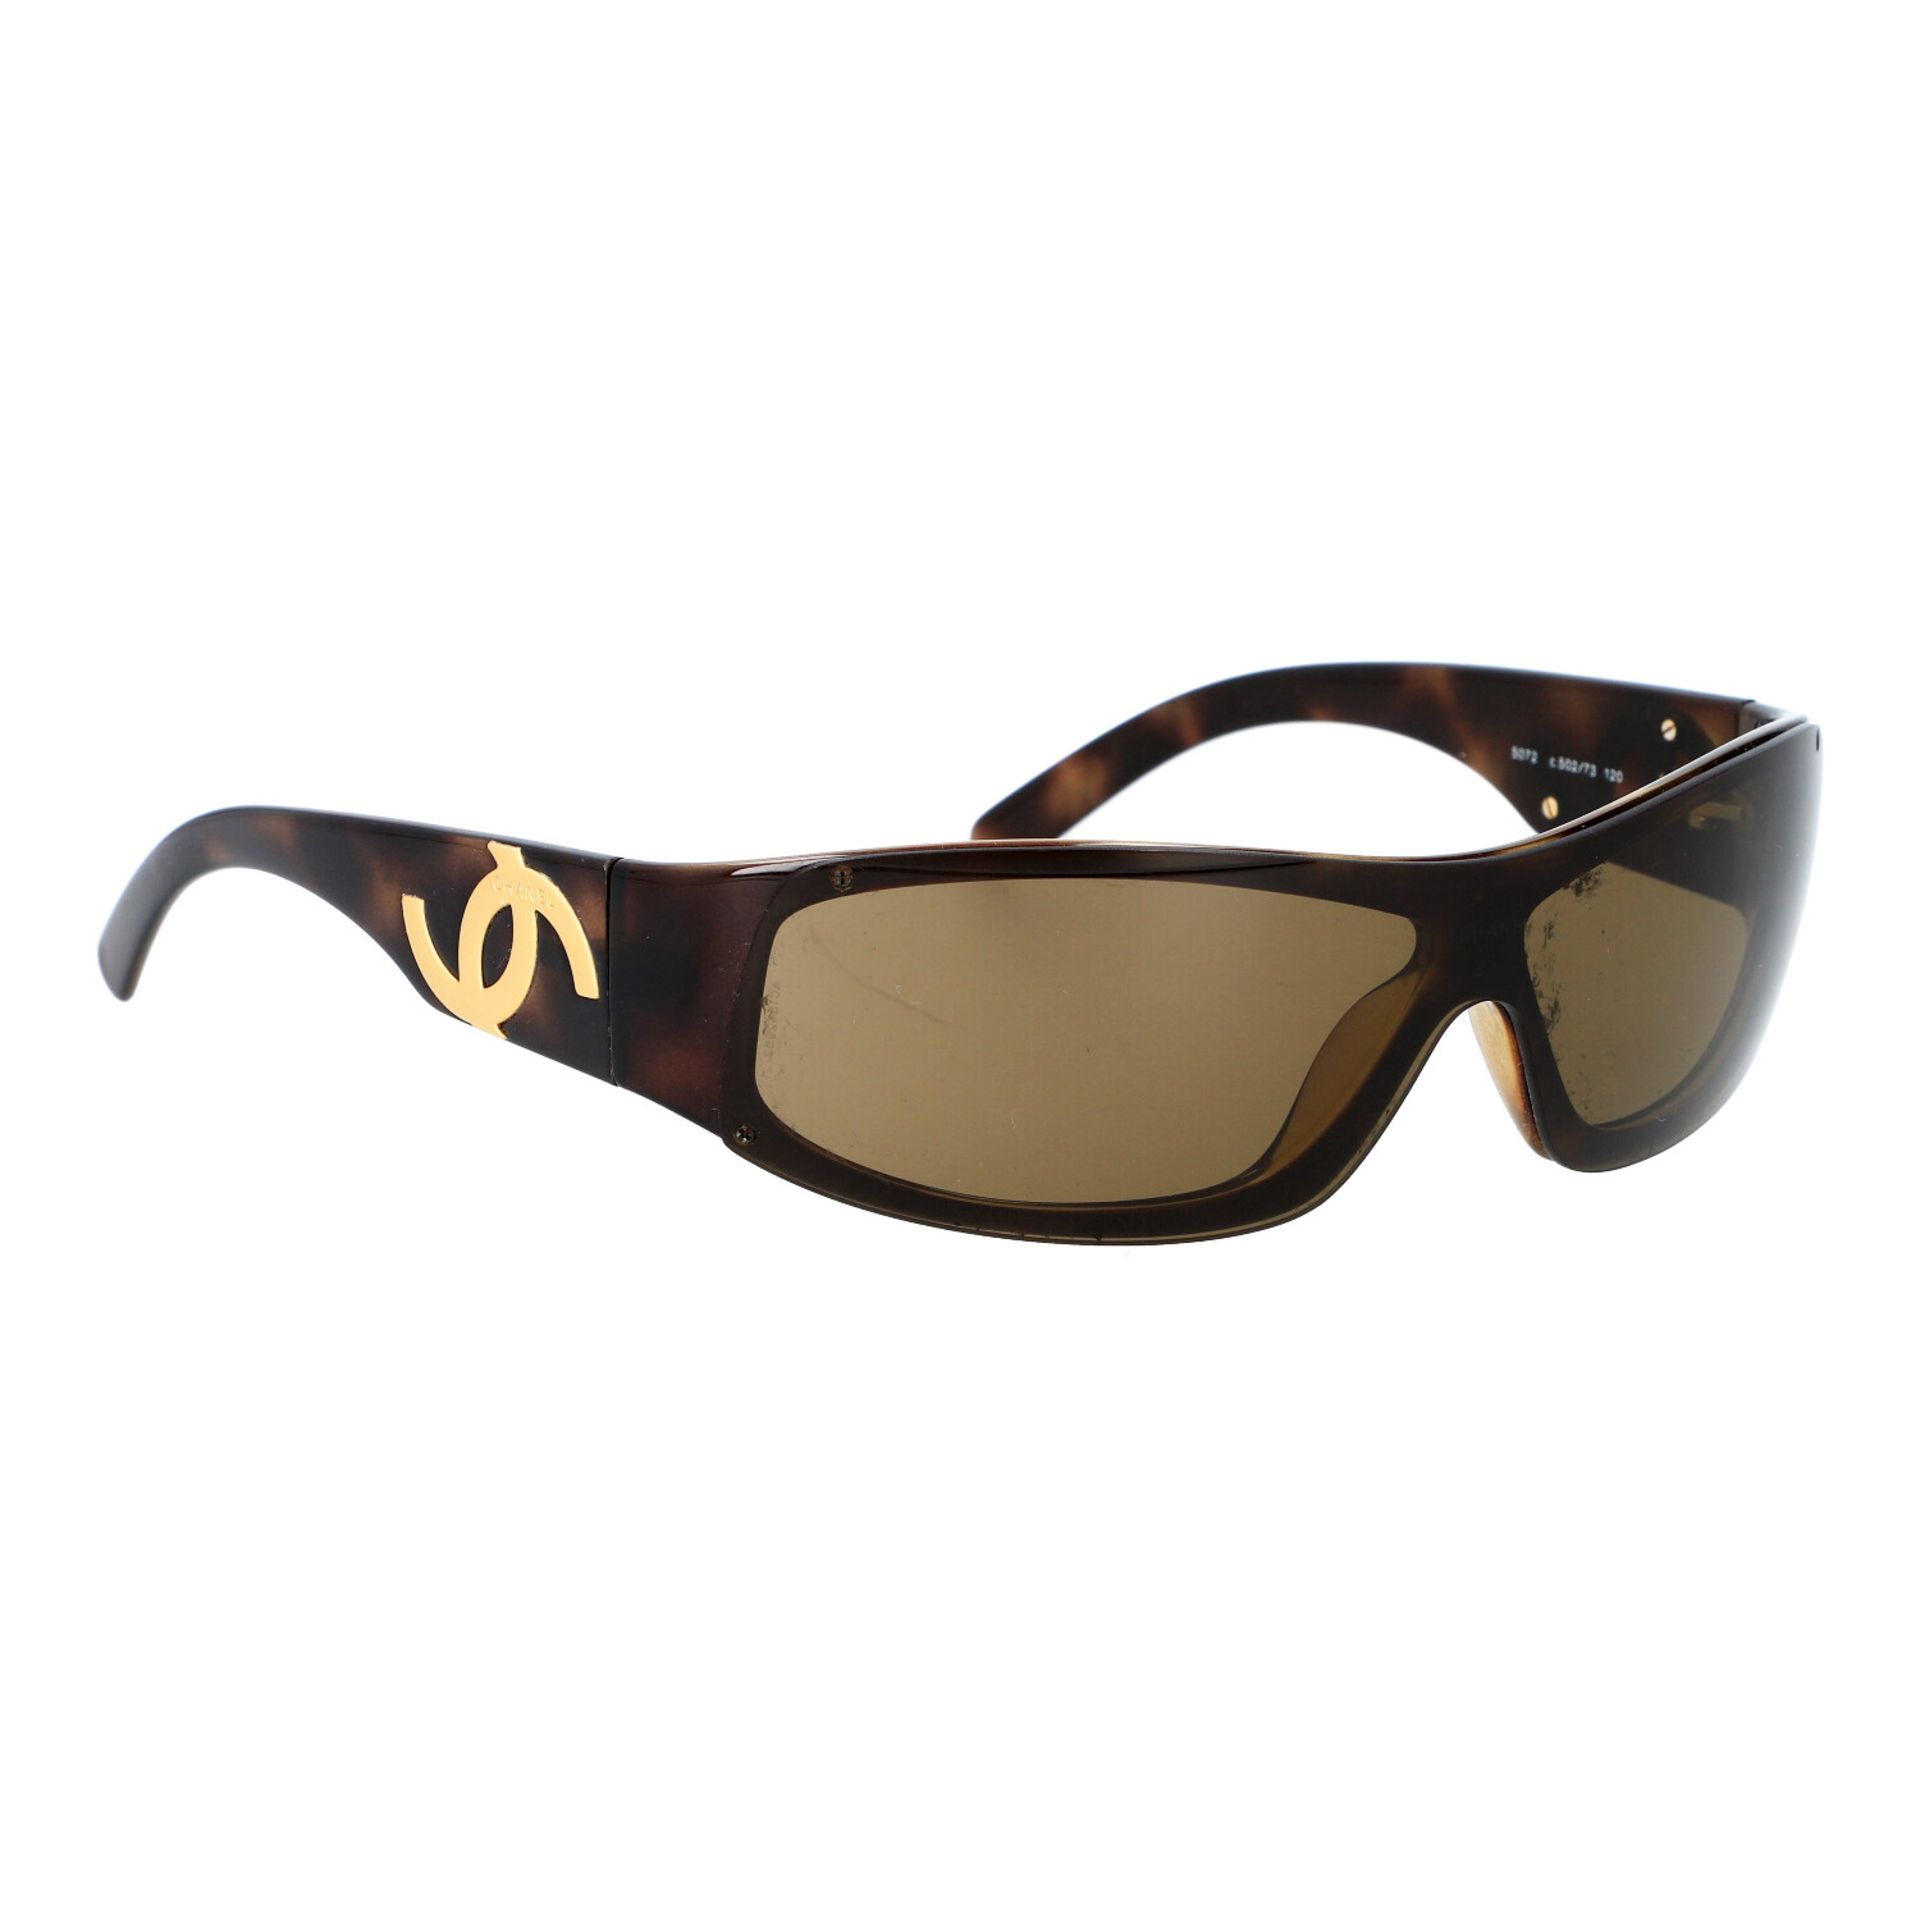 CHANEL Sonnenbrille "5072 c.502/73". - Image 2 of 5